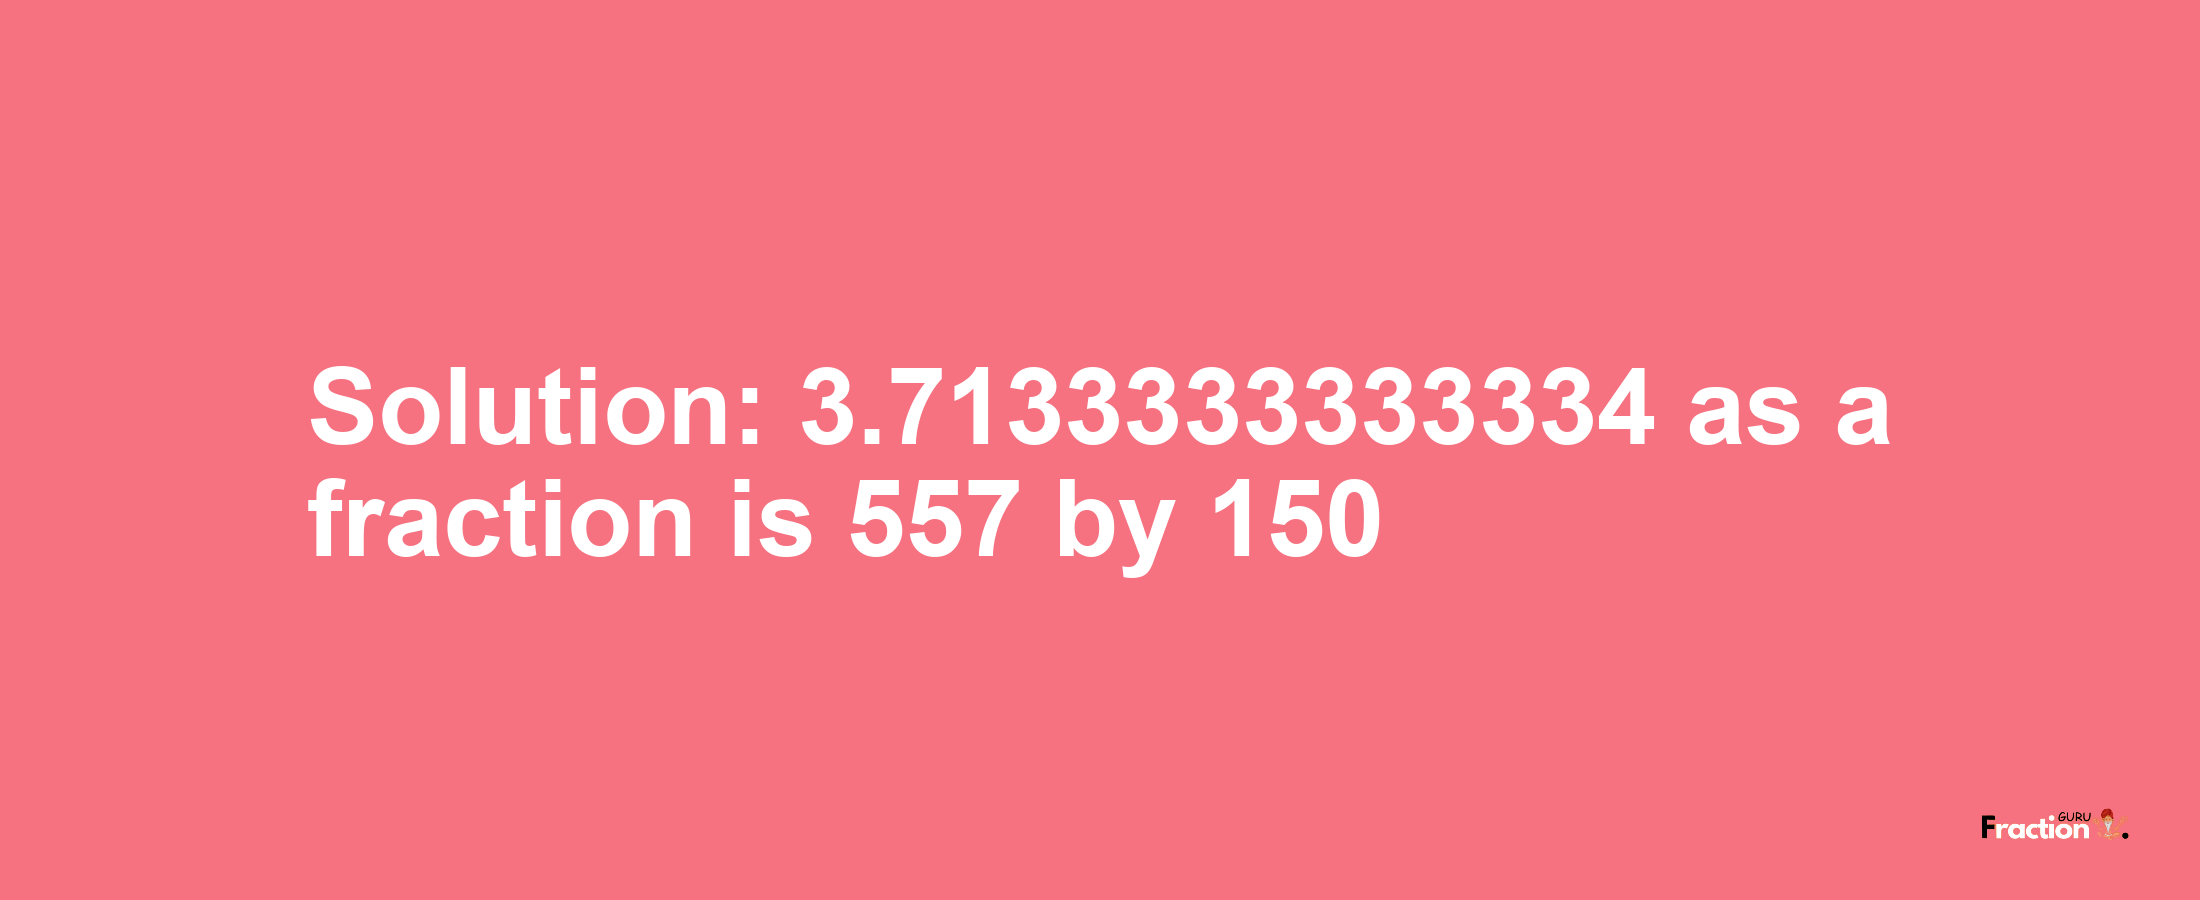 Solution:3.7133333333334 as a fraction is 557/150